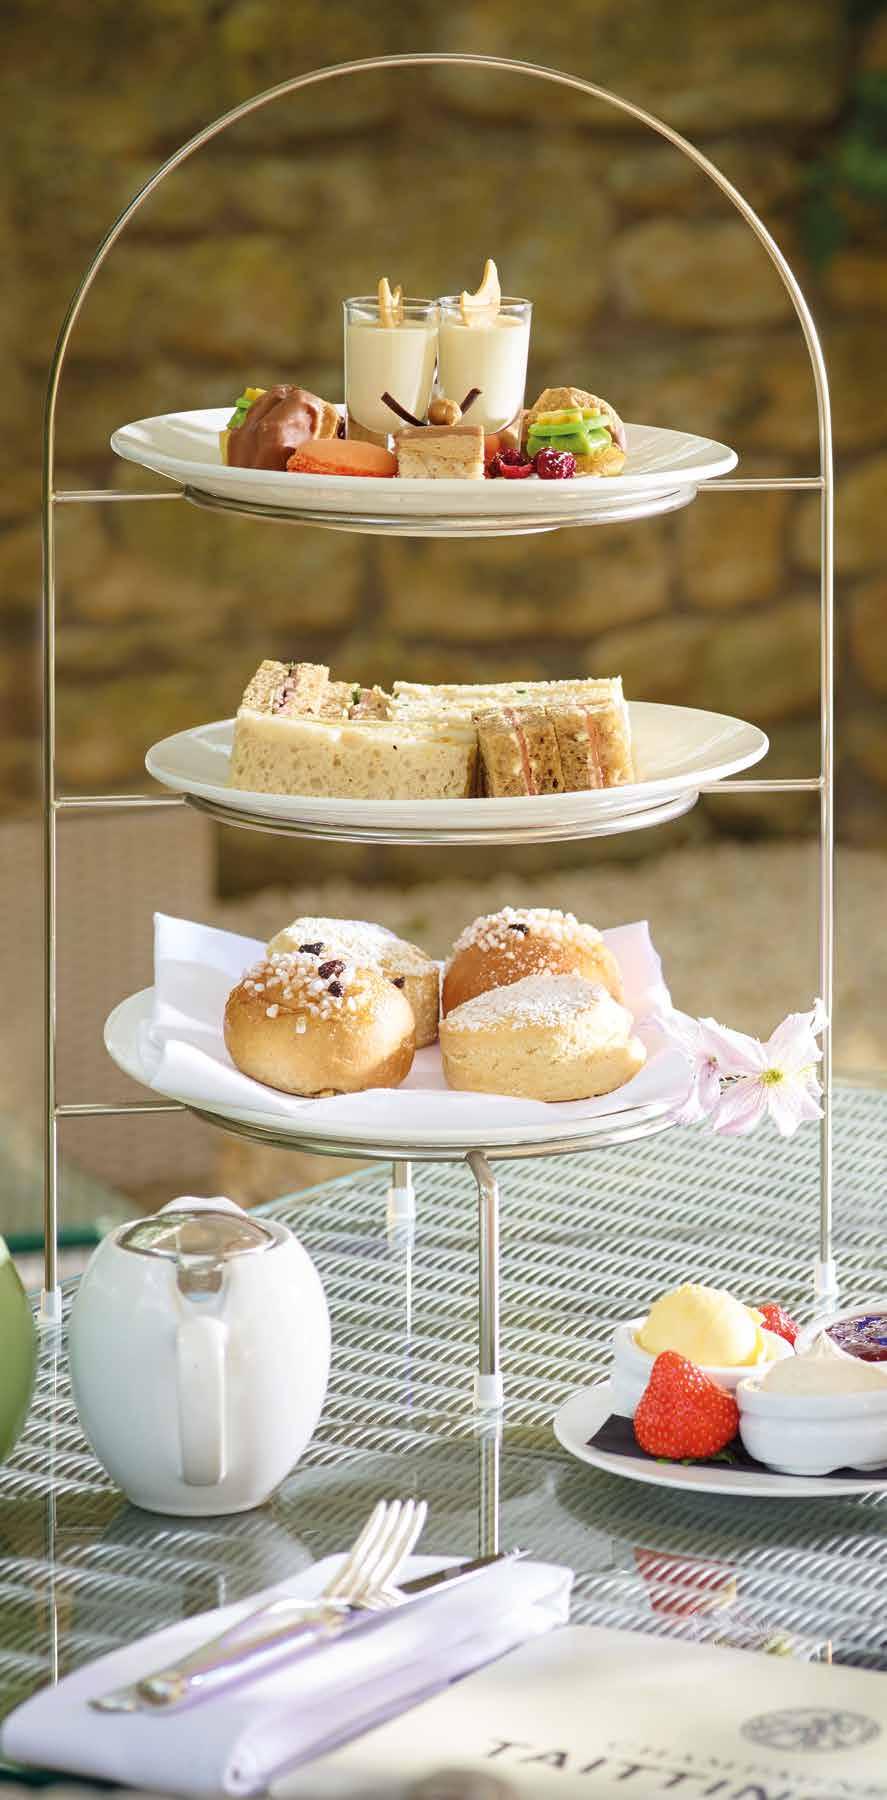 THE DOWER HOUSE & AFTERNOON TEA GARDEN The ultimate indulgence of Afternoon Tea at The Royal Crescent Hotel & Spa What could be more decadent than afternoon tea in this Georgian splendour,